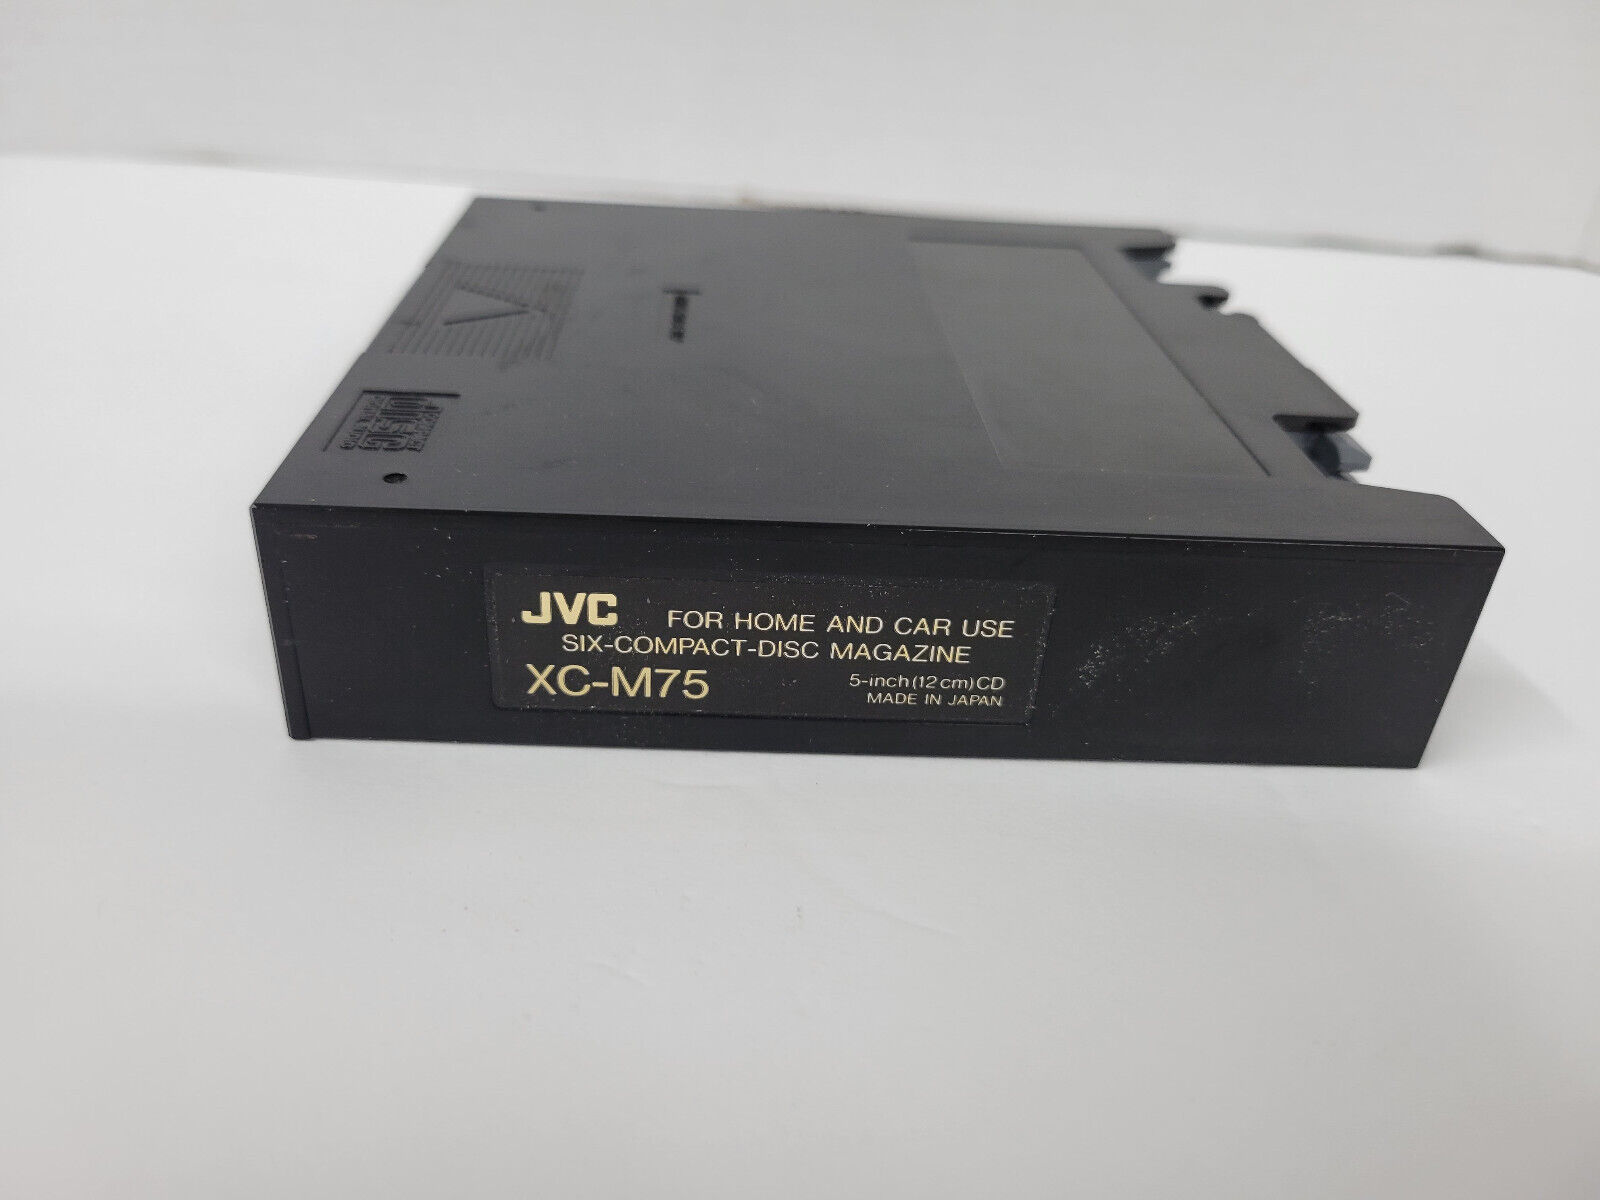 Jvc Xc-m75 Six 6 Disc Compact Disc Cd Magazine For Home & Car Use